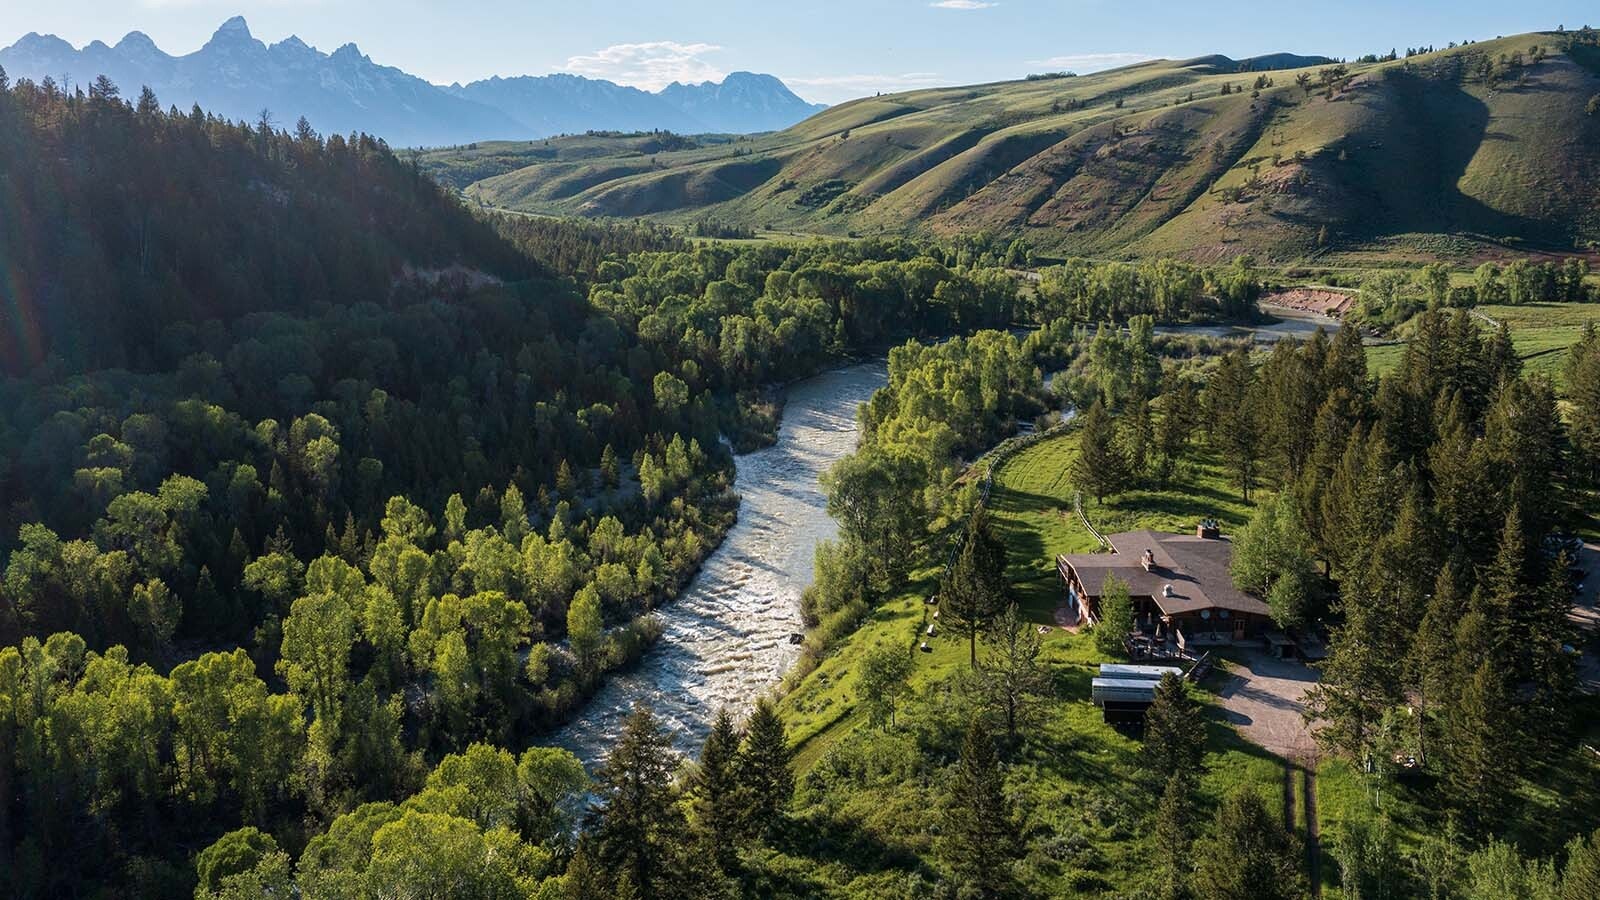 The historic 118-acre Gros Venture River Ranch in Teton County, Wyoming, is for sale, listing at $58 million.